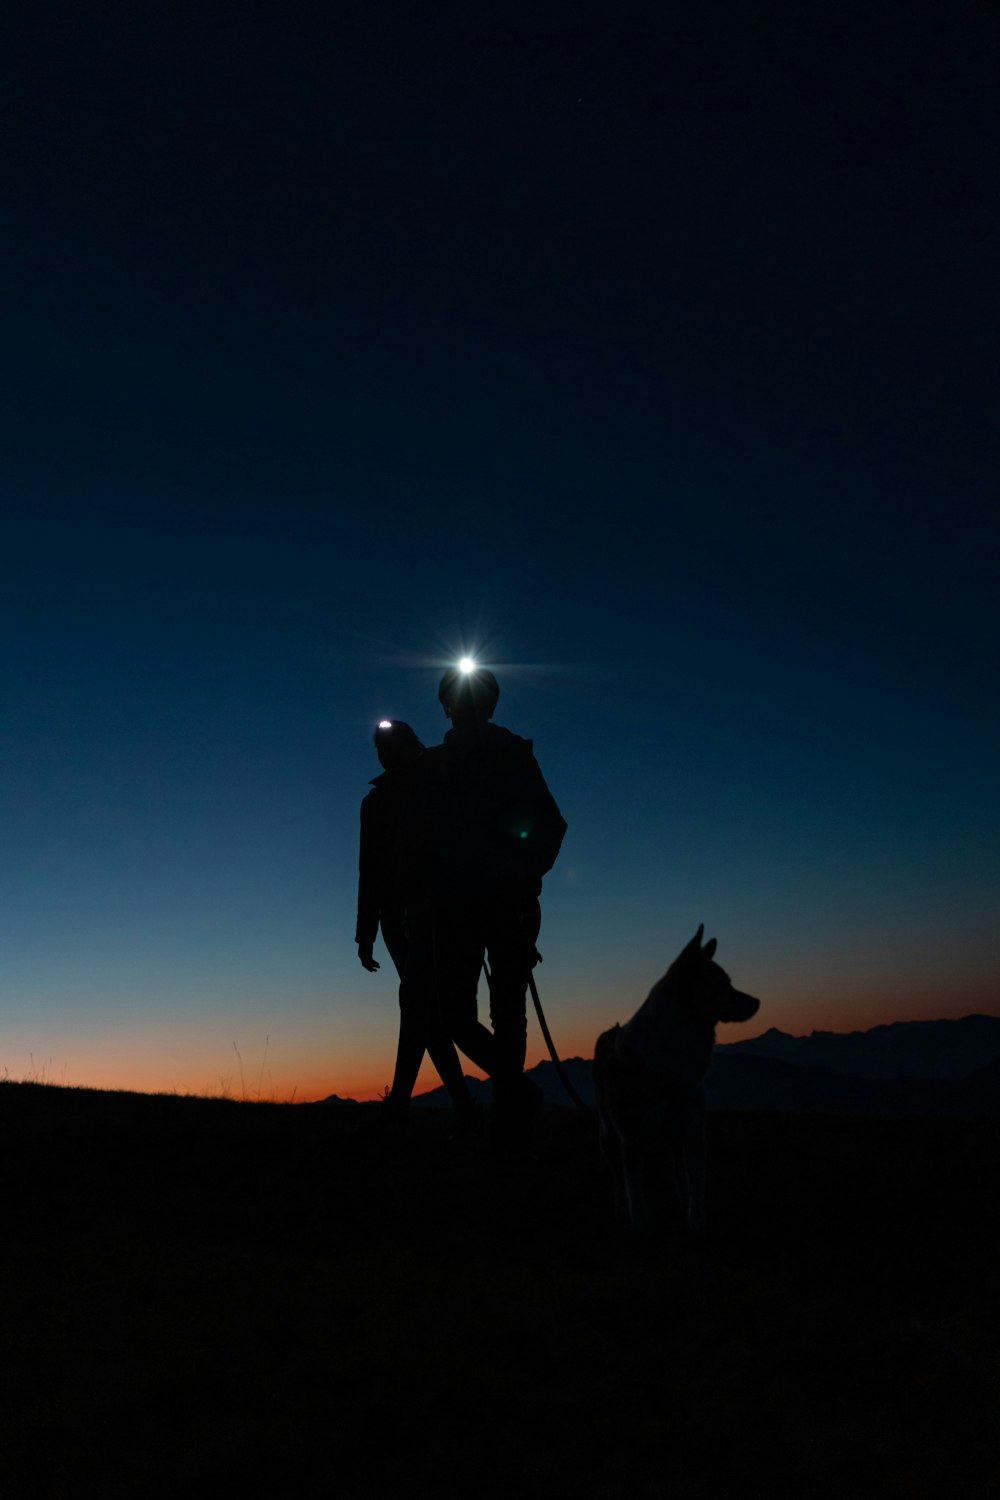 a person with a dog in a field at night